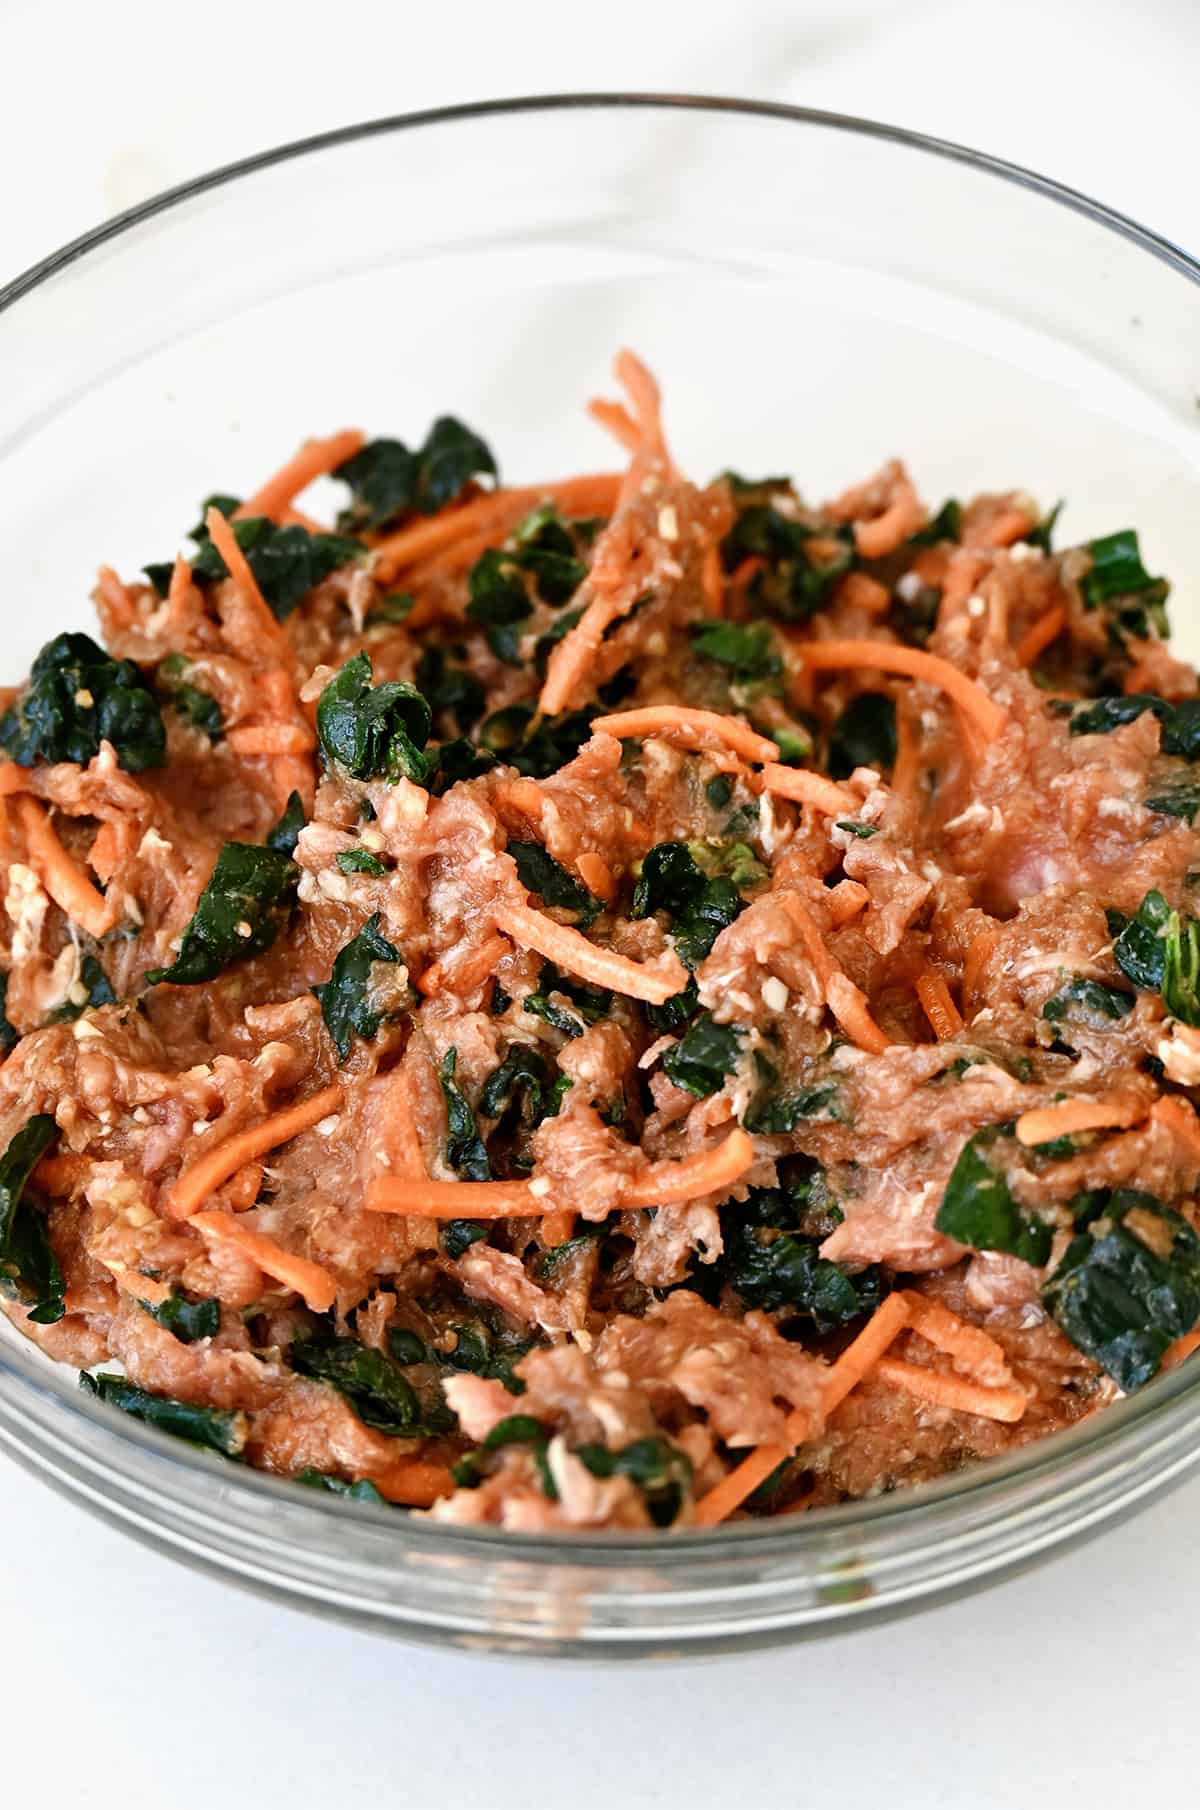 Ground pork, kale and shredded carrots in a glass bowl.